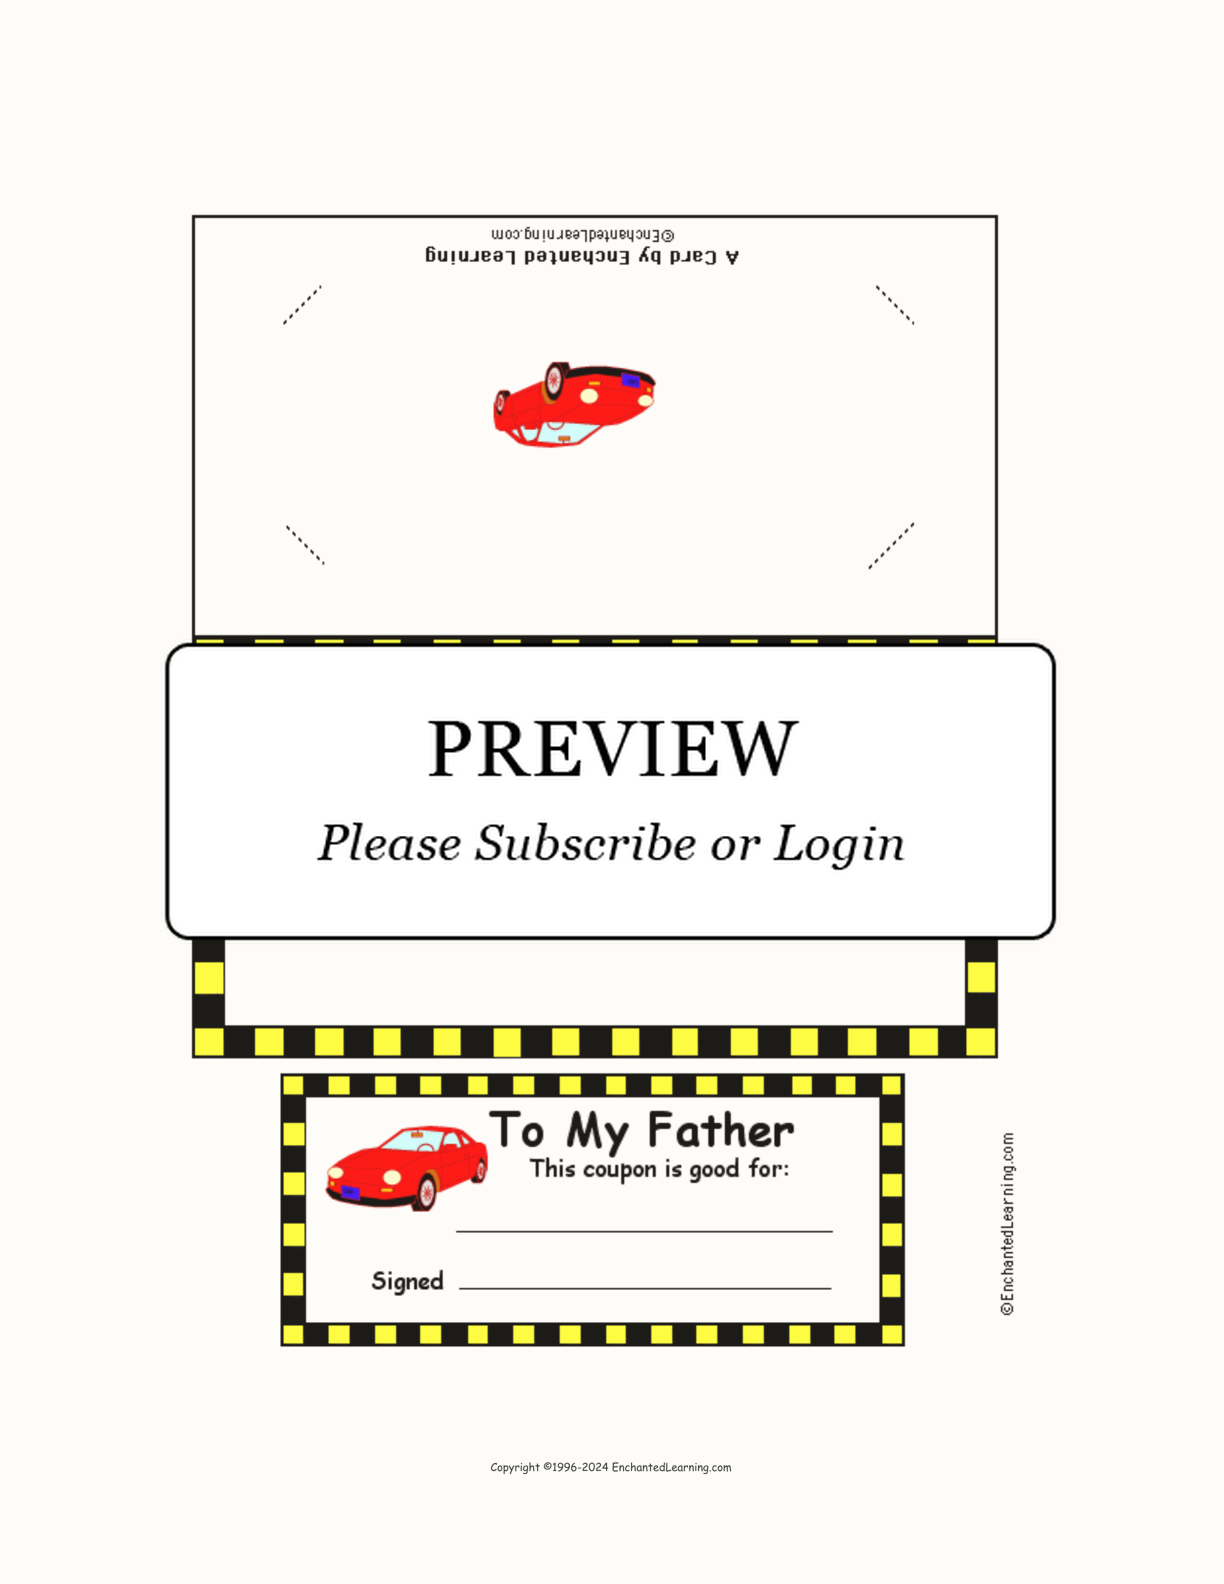 Father's Day Coupon Card Template (Color) interactive printout page 1